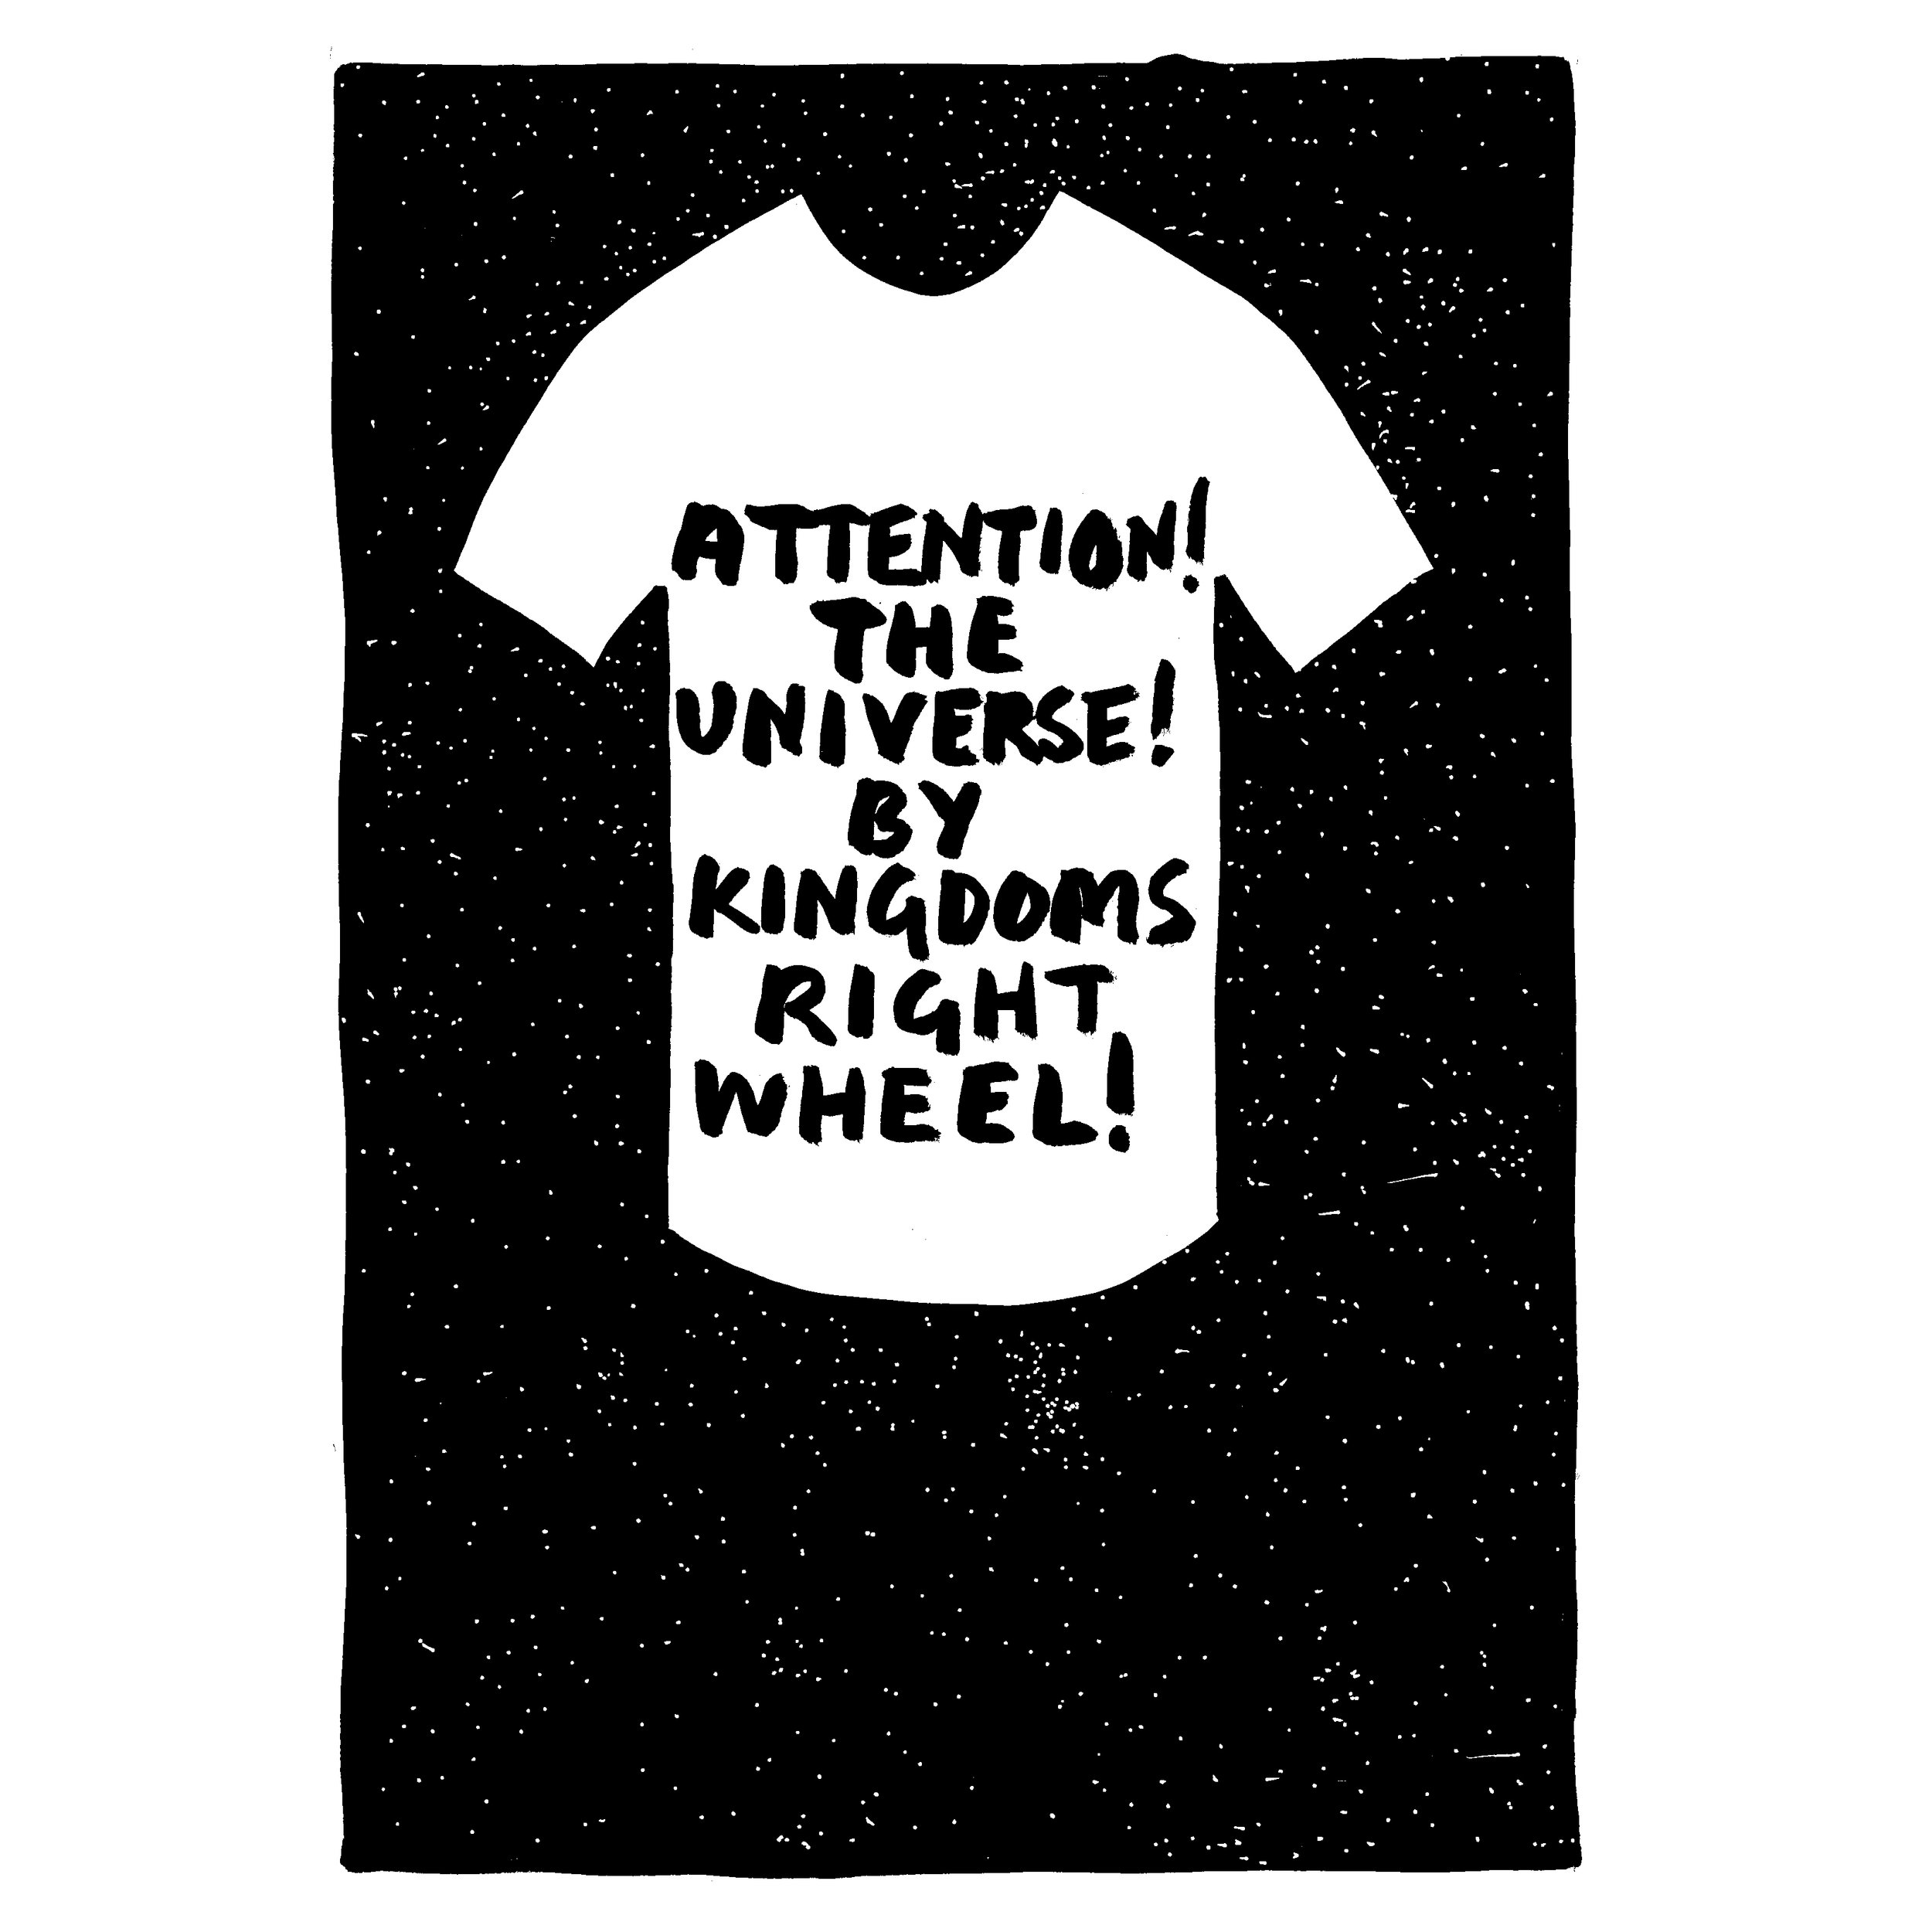 Attention the Universe By Kingdoms Right Wheel.jpg